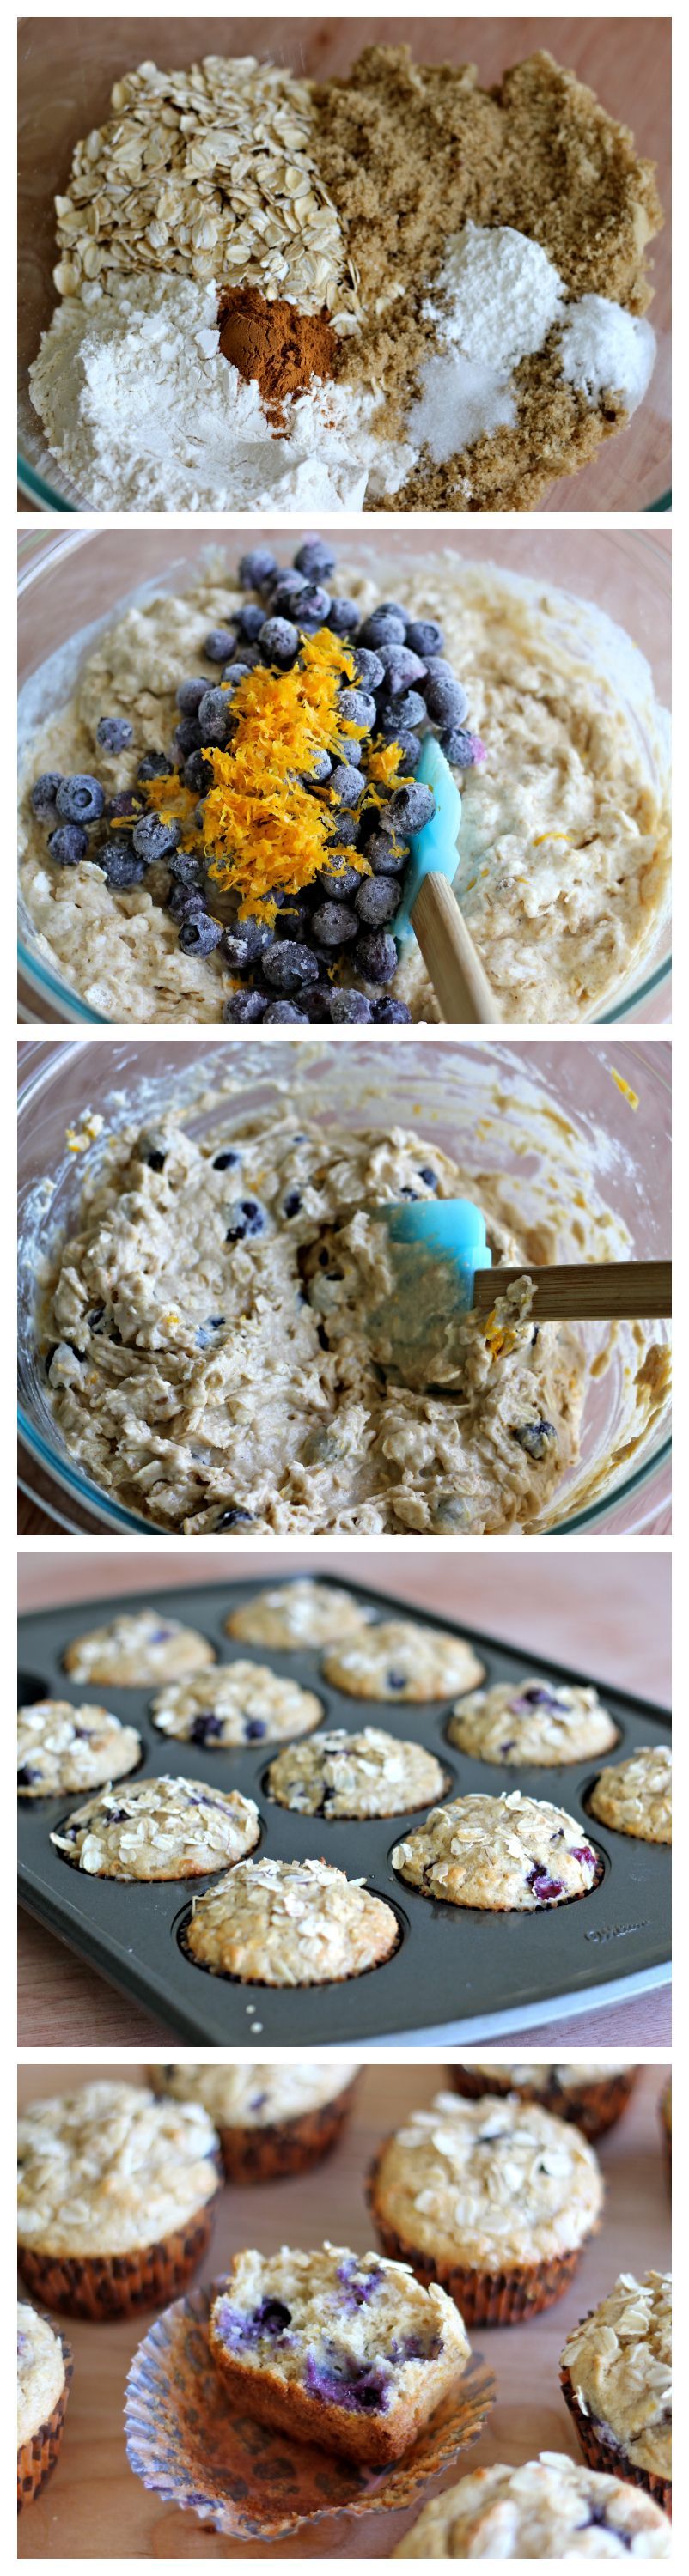 Blueberry Orange Oatmeal Muffins – Healthy, hearty muffins loaded with juicy blu